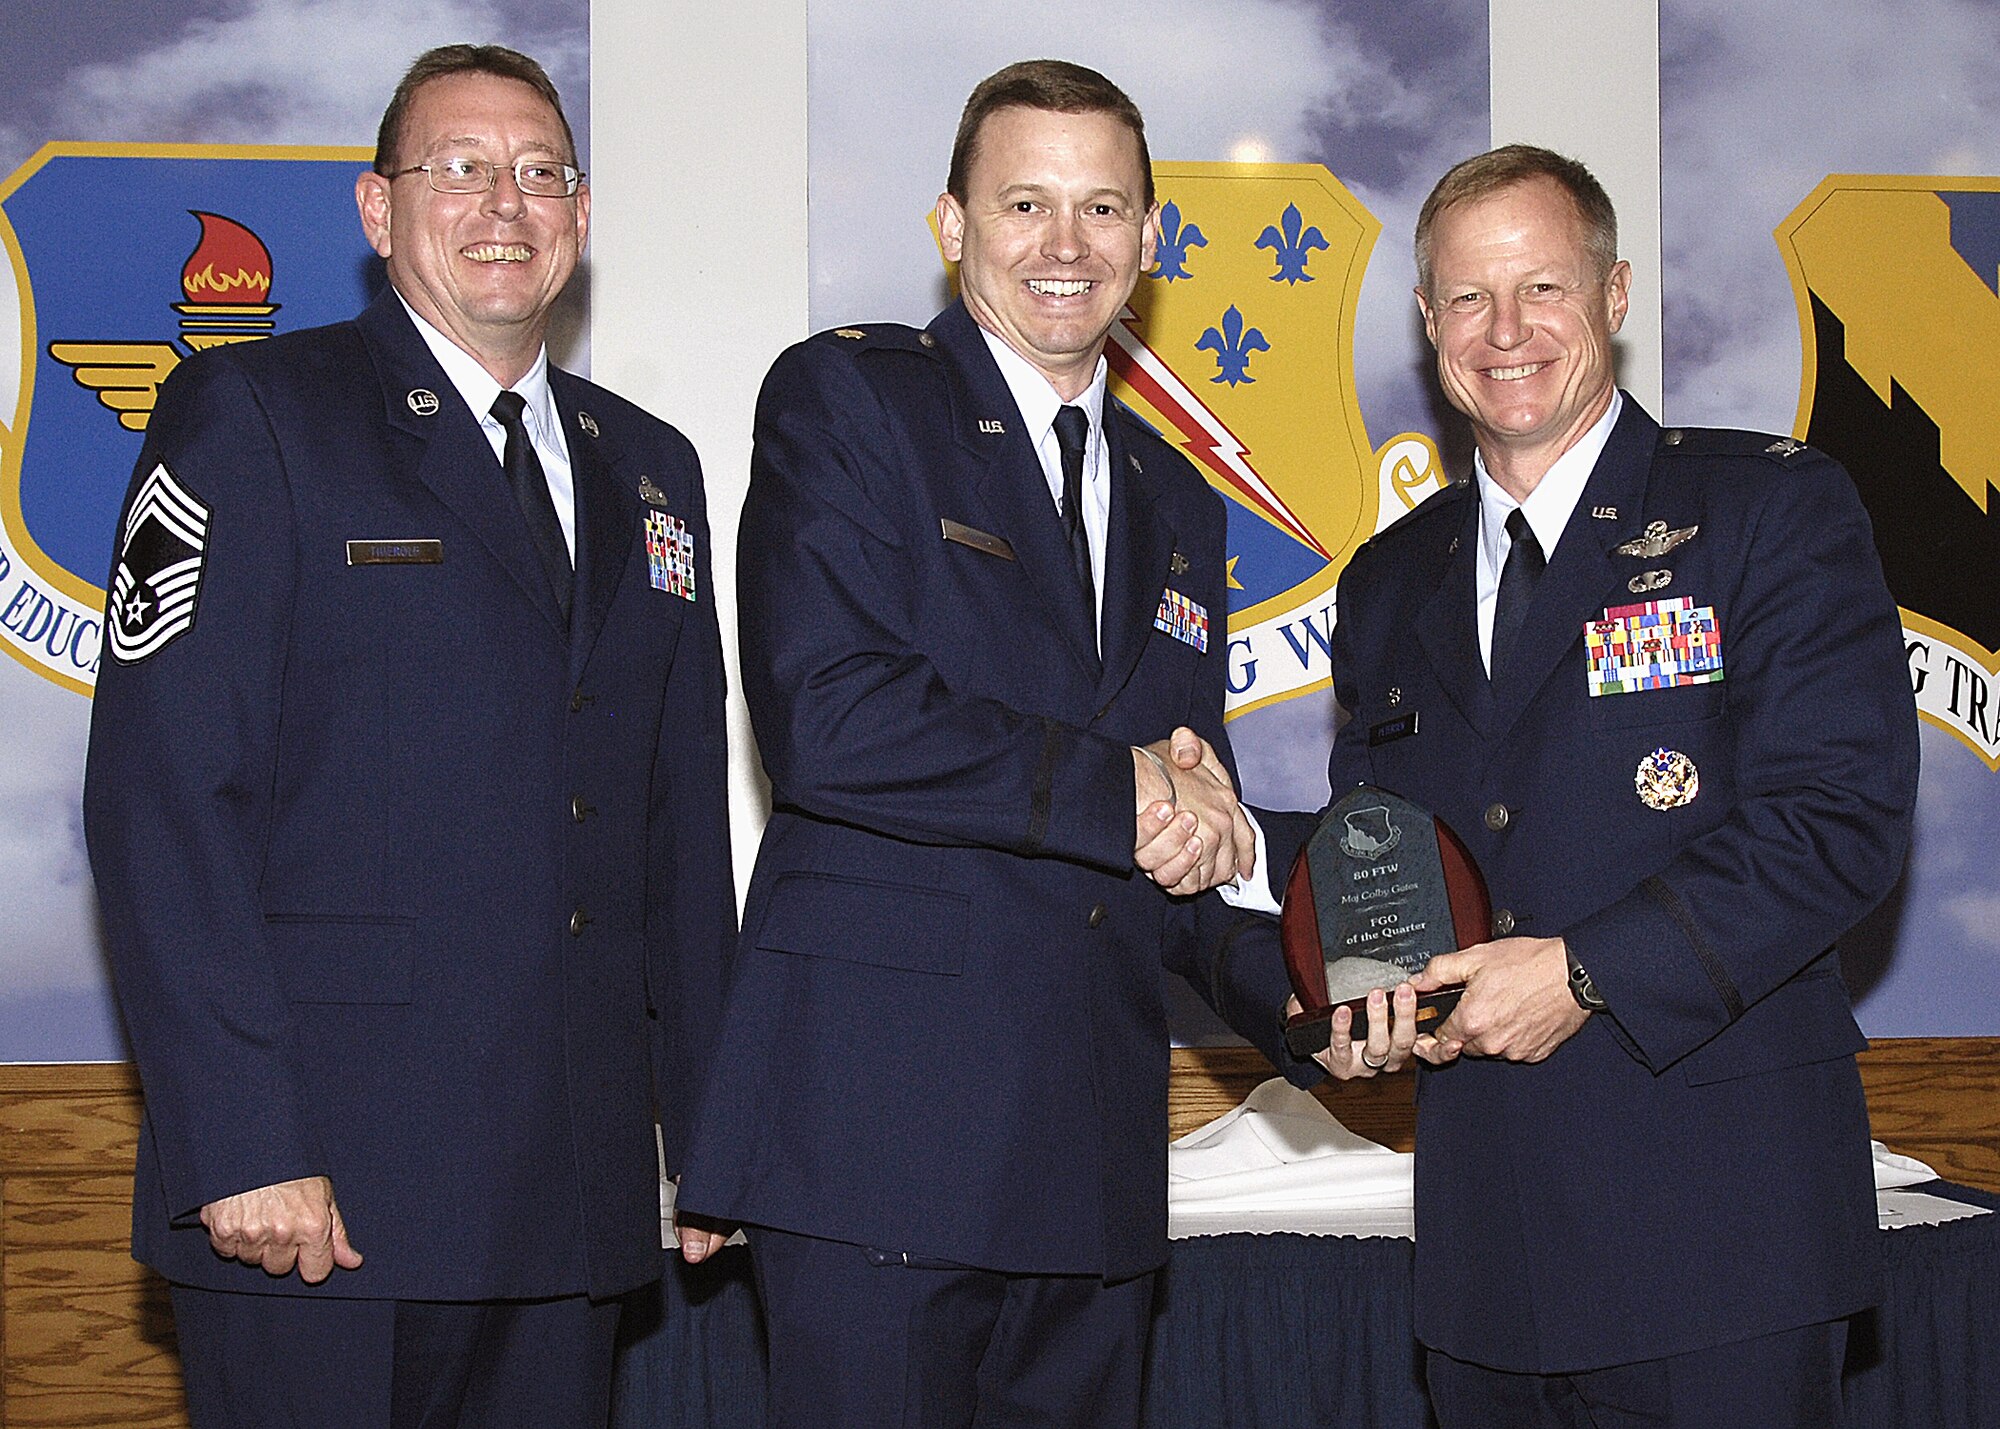 Maj. Colby Cates accepts the Field Grade Officer of the Quarter award from Col. David Petersen, commander of the 80th Flying Training Wing, April 22 at the wing's quarterly award luncheon. Major Cates was recognized for his efforts with the incoming T-6A Texan IIs, pursuing a masters degree through Air University and being involved in his church and coaching T-Ball in the Wichita Falls Little League. Also pictured is 80th FTW Superintendant Chief Master Sgt. Norman Thierolf. (U.S. Air Force photo/Harry Tonemah)